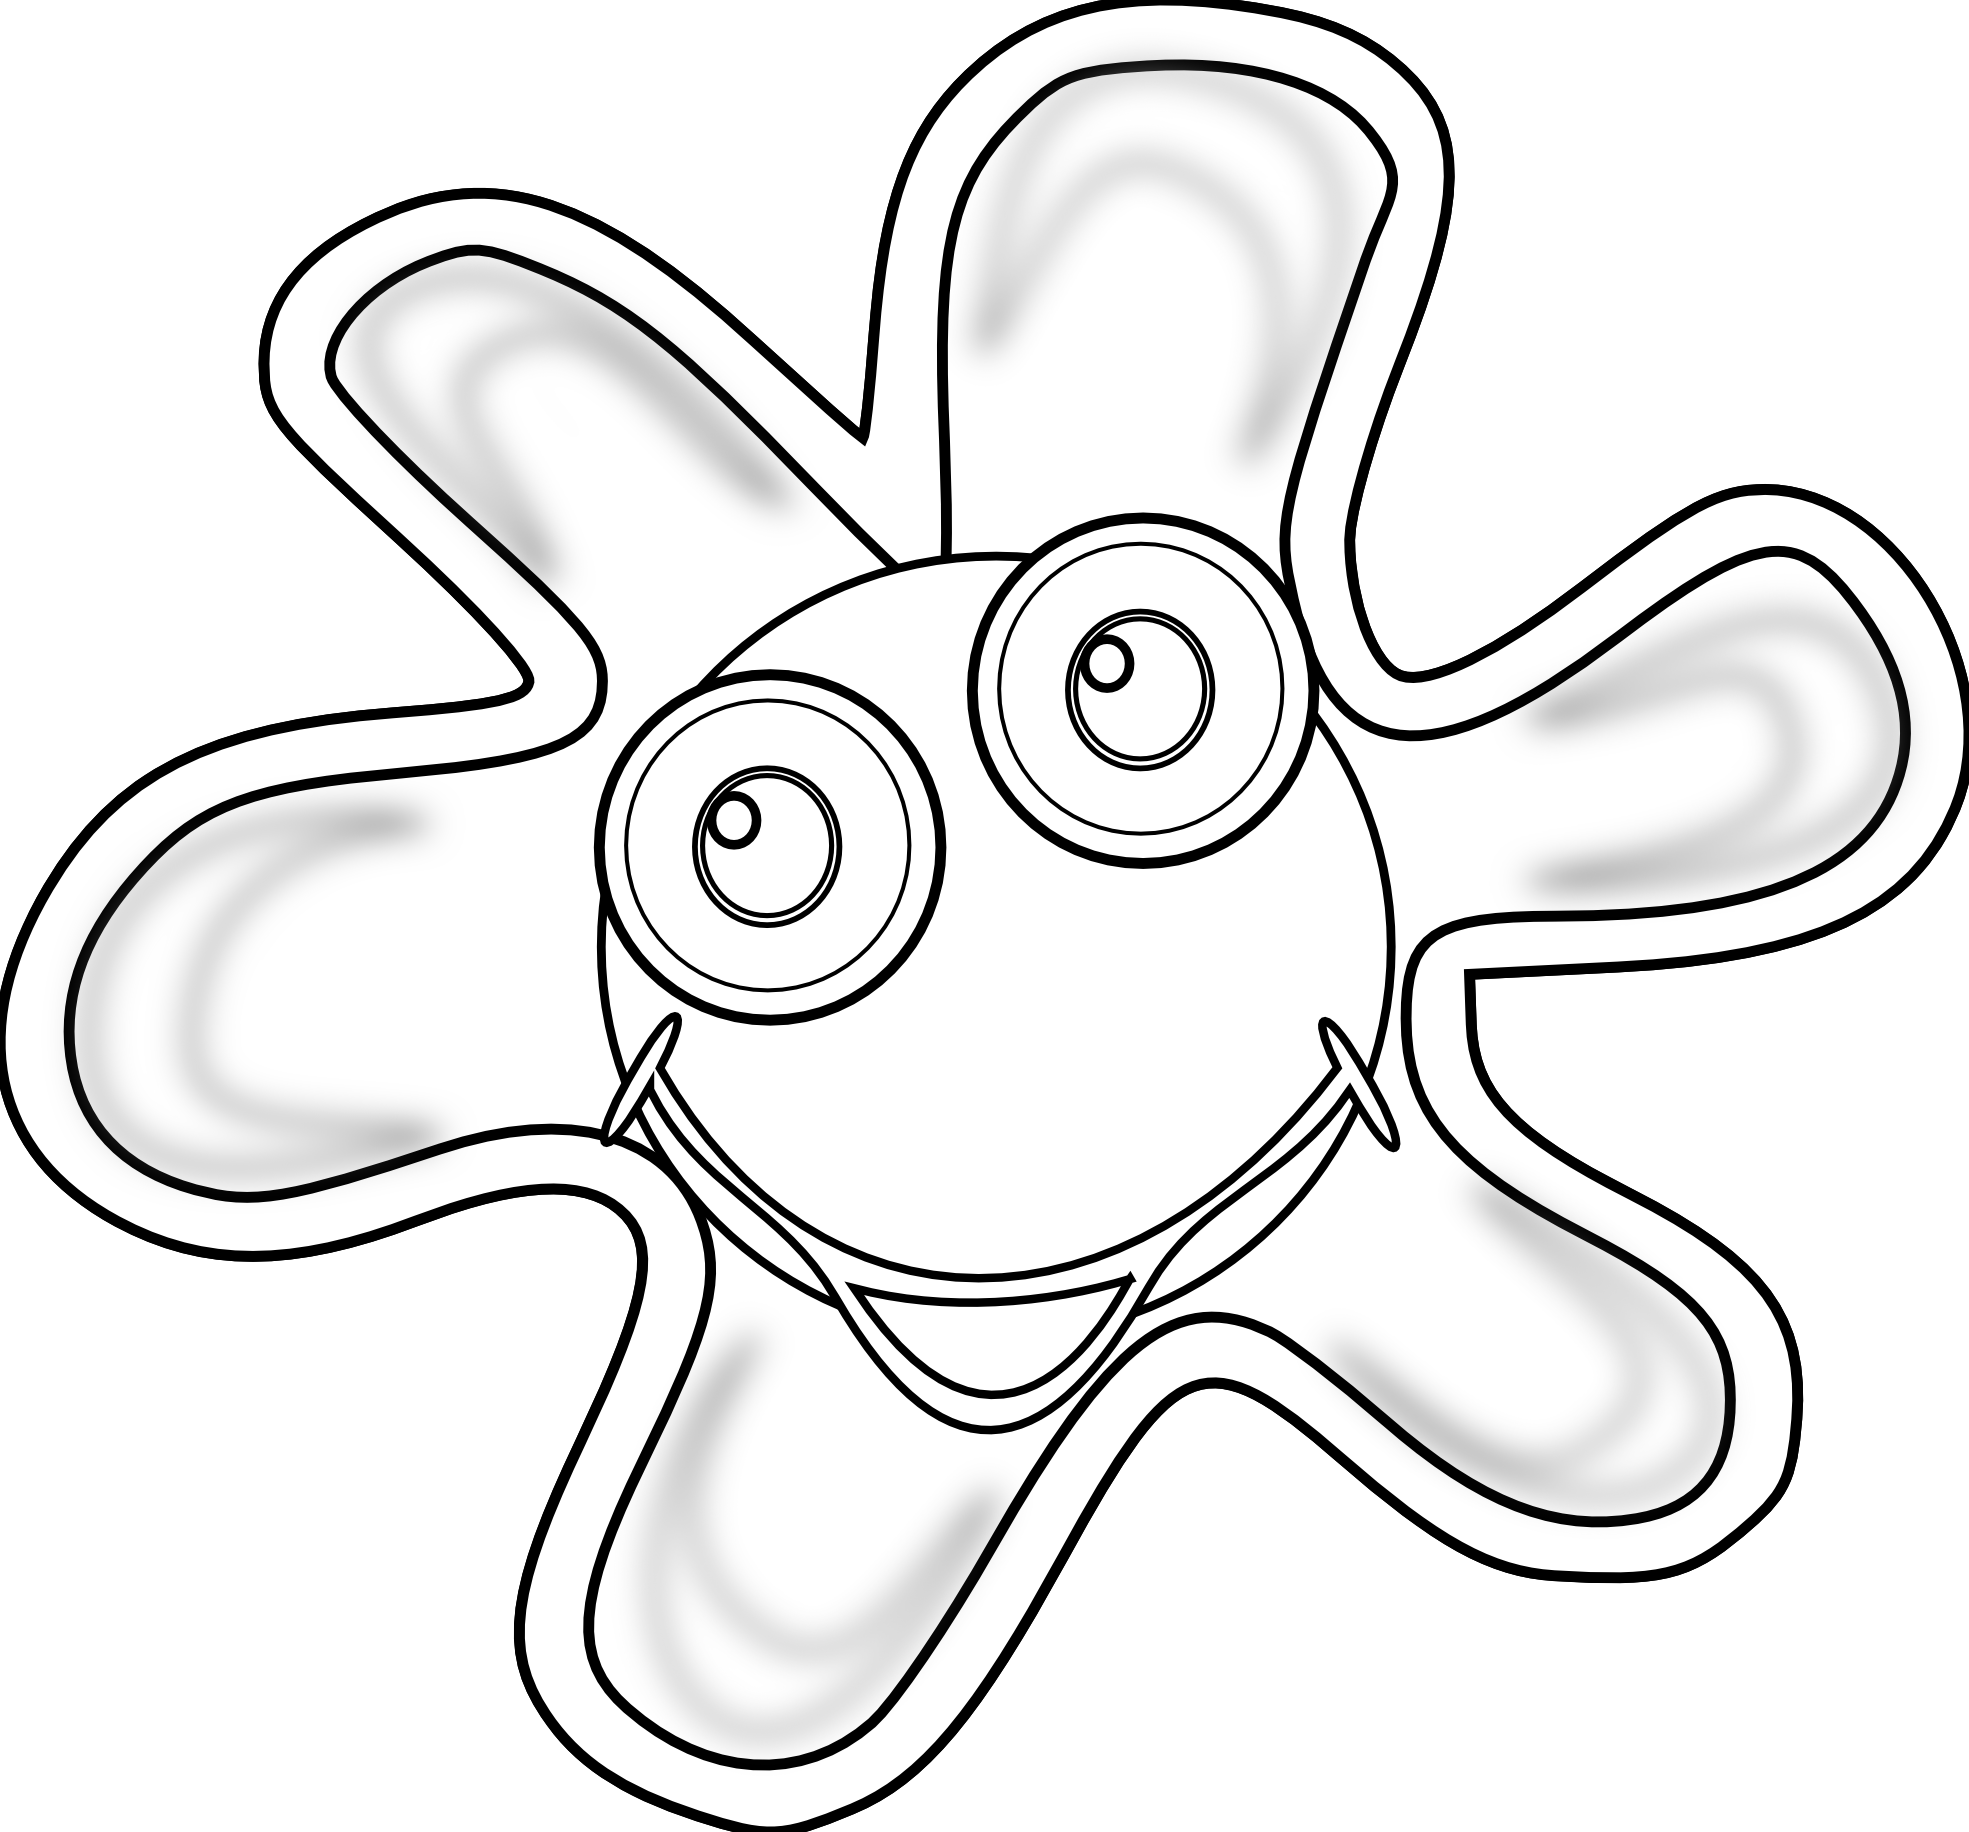 Bacteria Clipart Black And White.